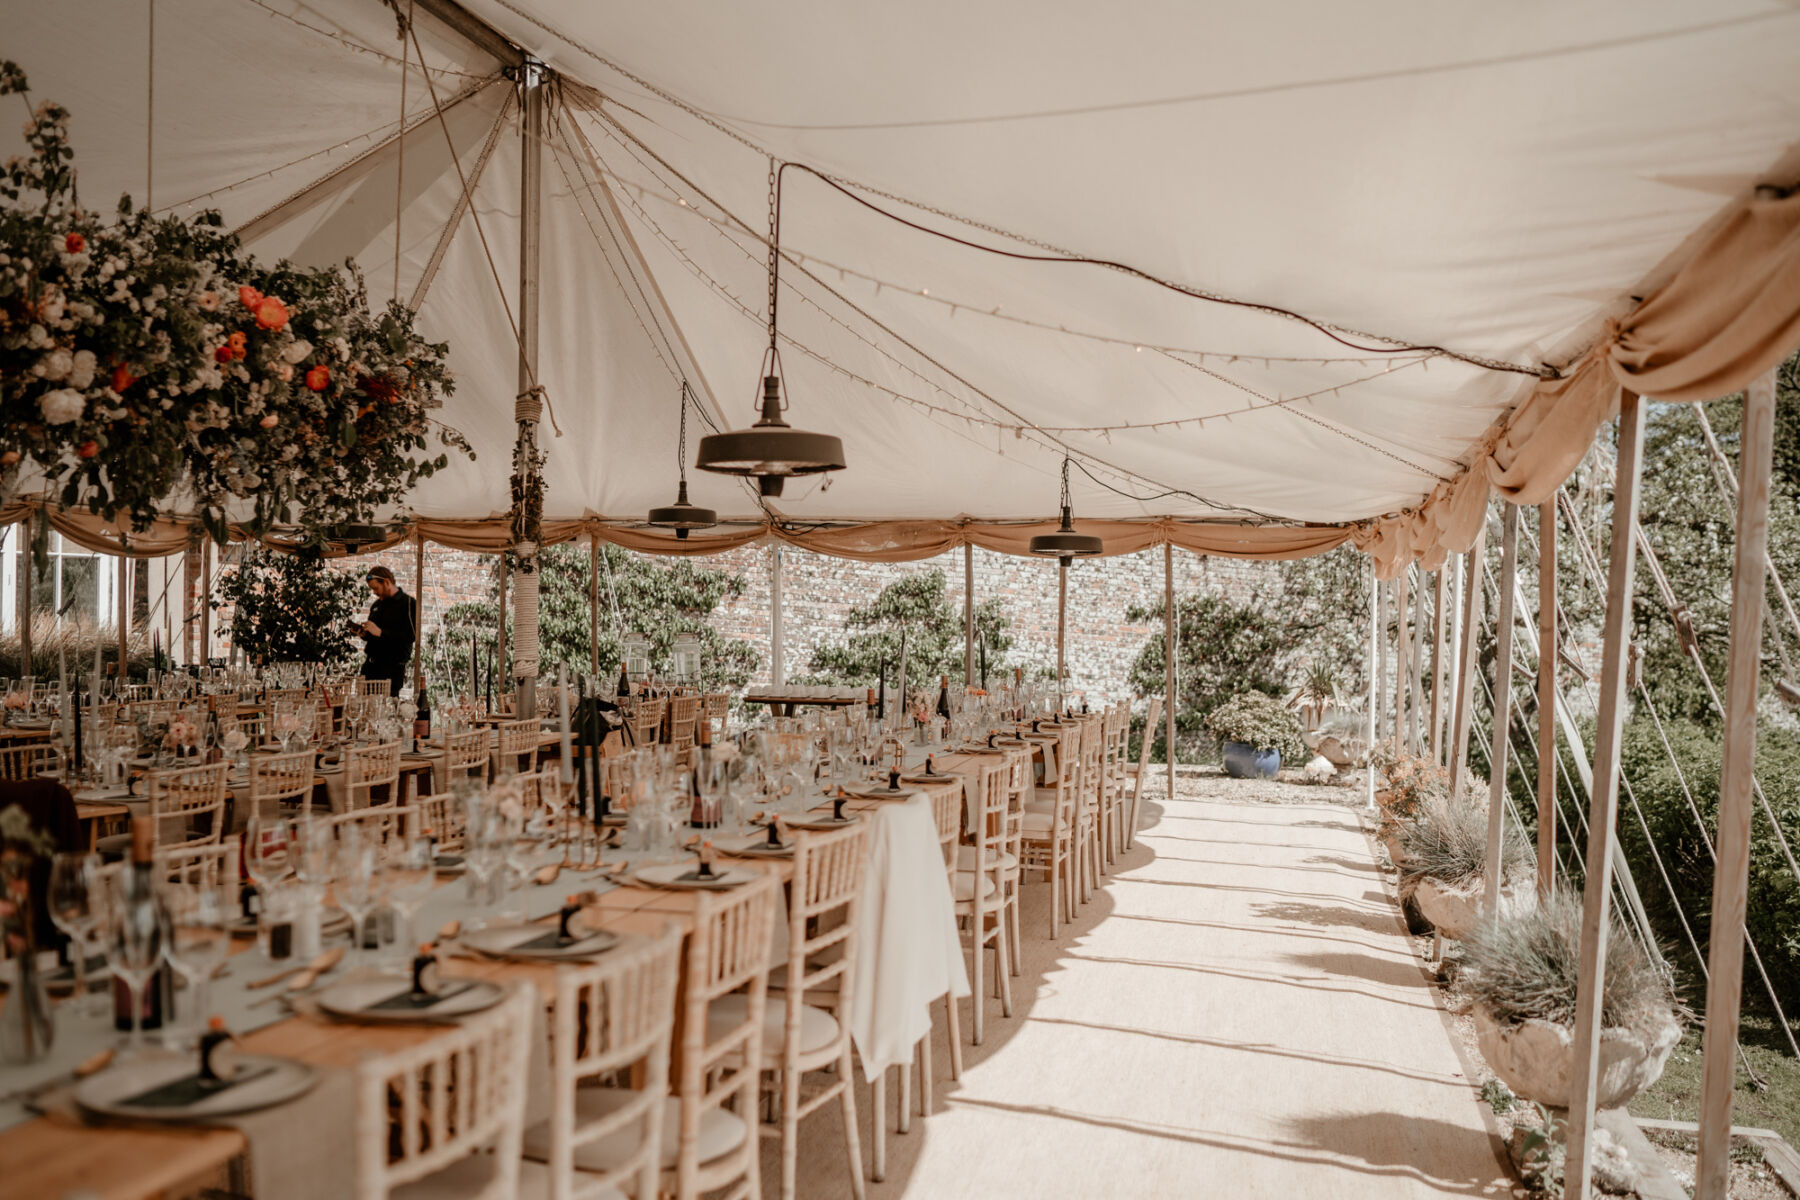 Elegant wedding marquee reception with long wooden tables and hanging flowers